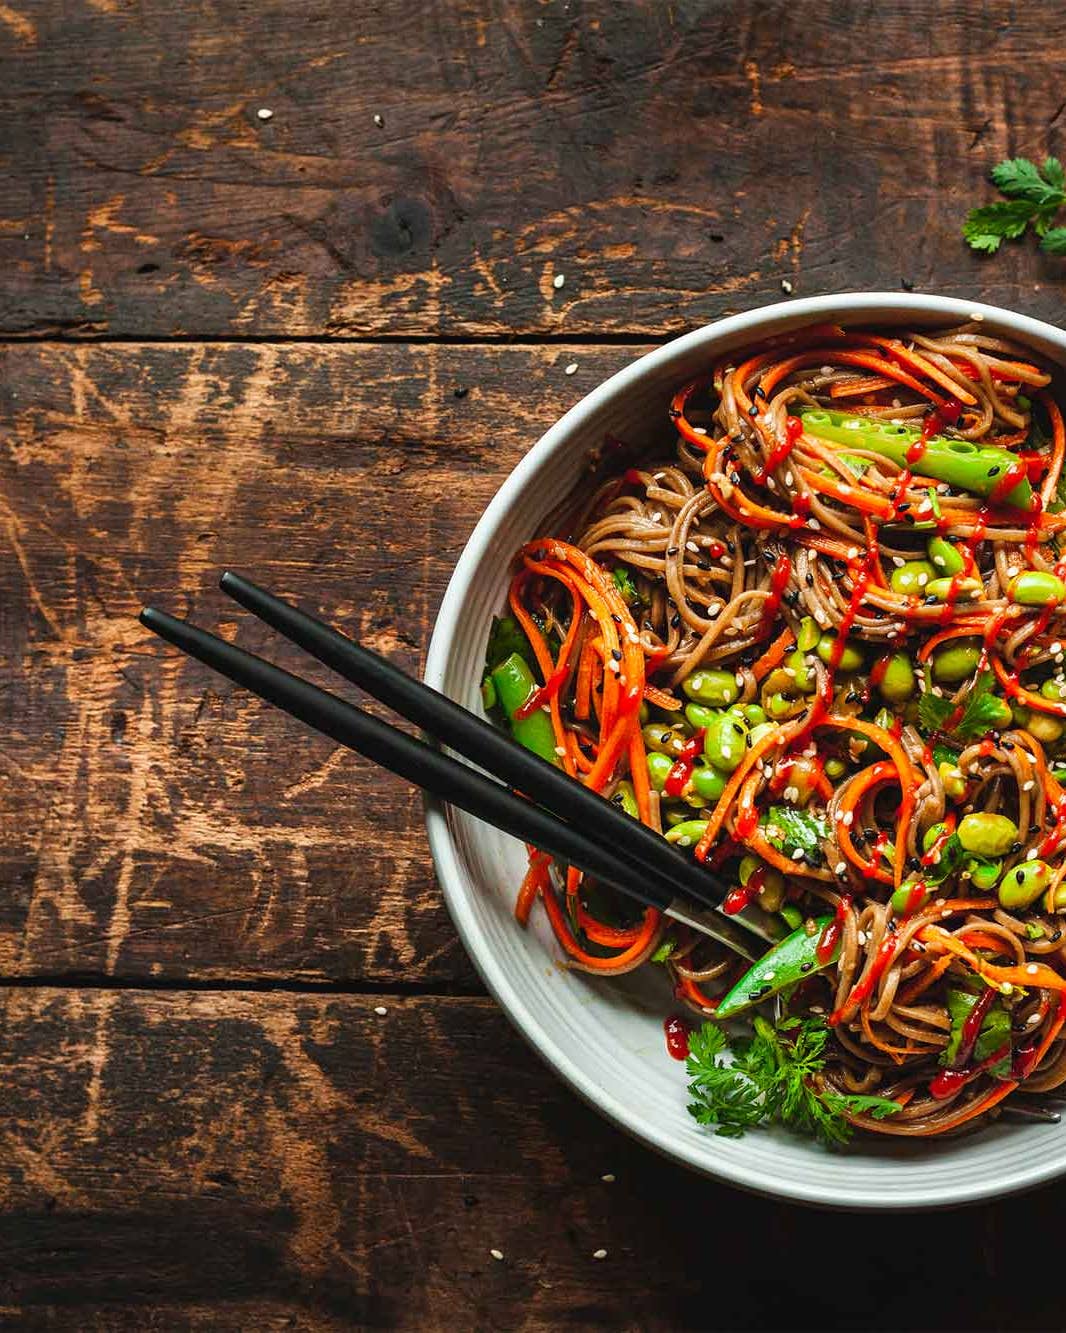 Bowl of noodles and vegetables with chopsticks